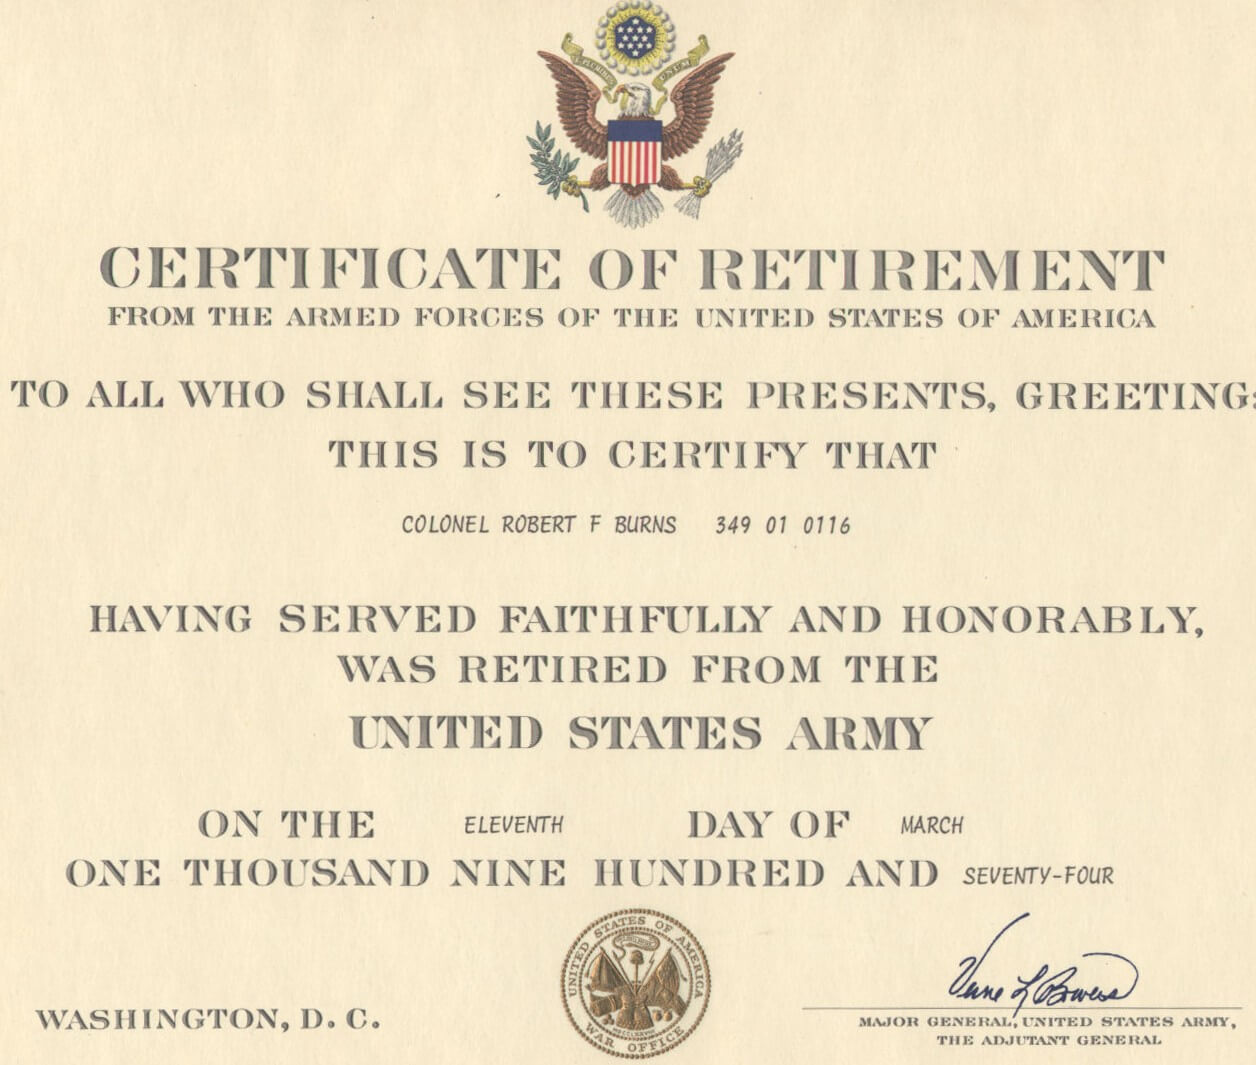 Pin On Pinterest. Sample Images Frompo. . Insanity Inside Retirement Certificate Template